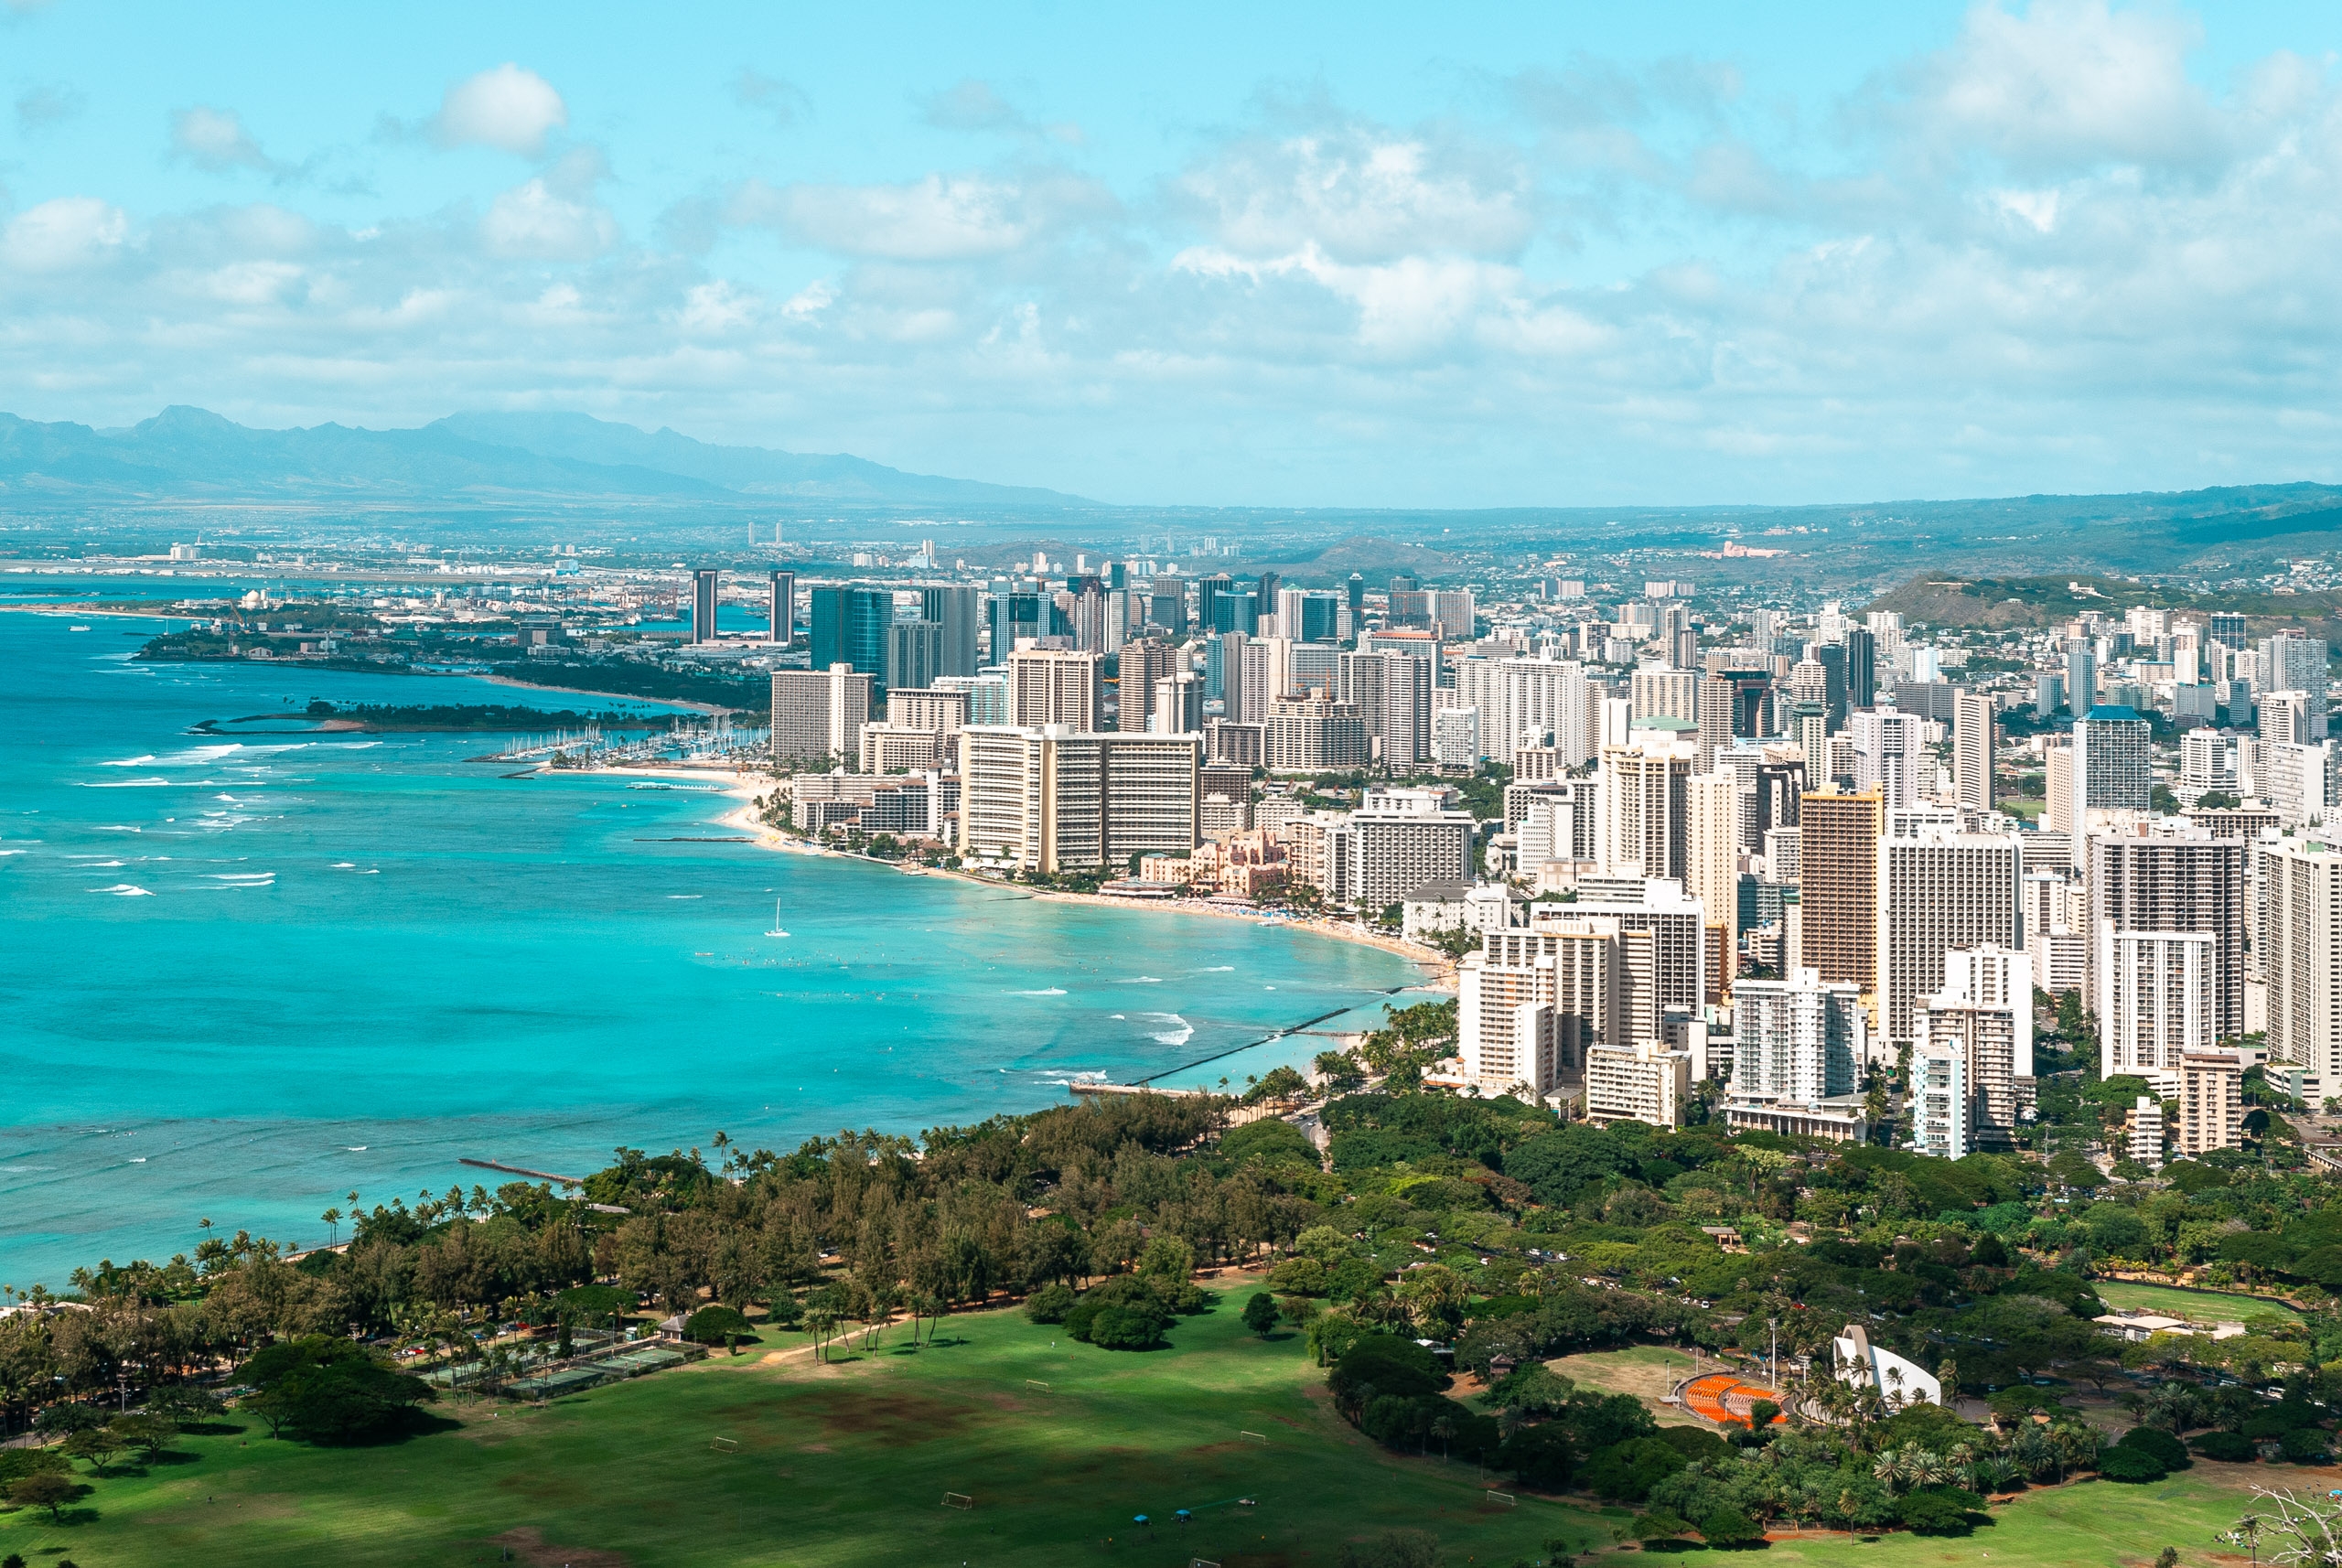 Looking out over Honolulu from the top of Diamond Head 3